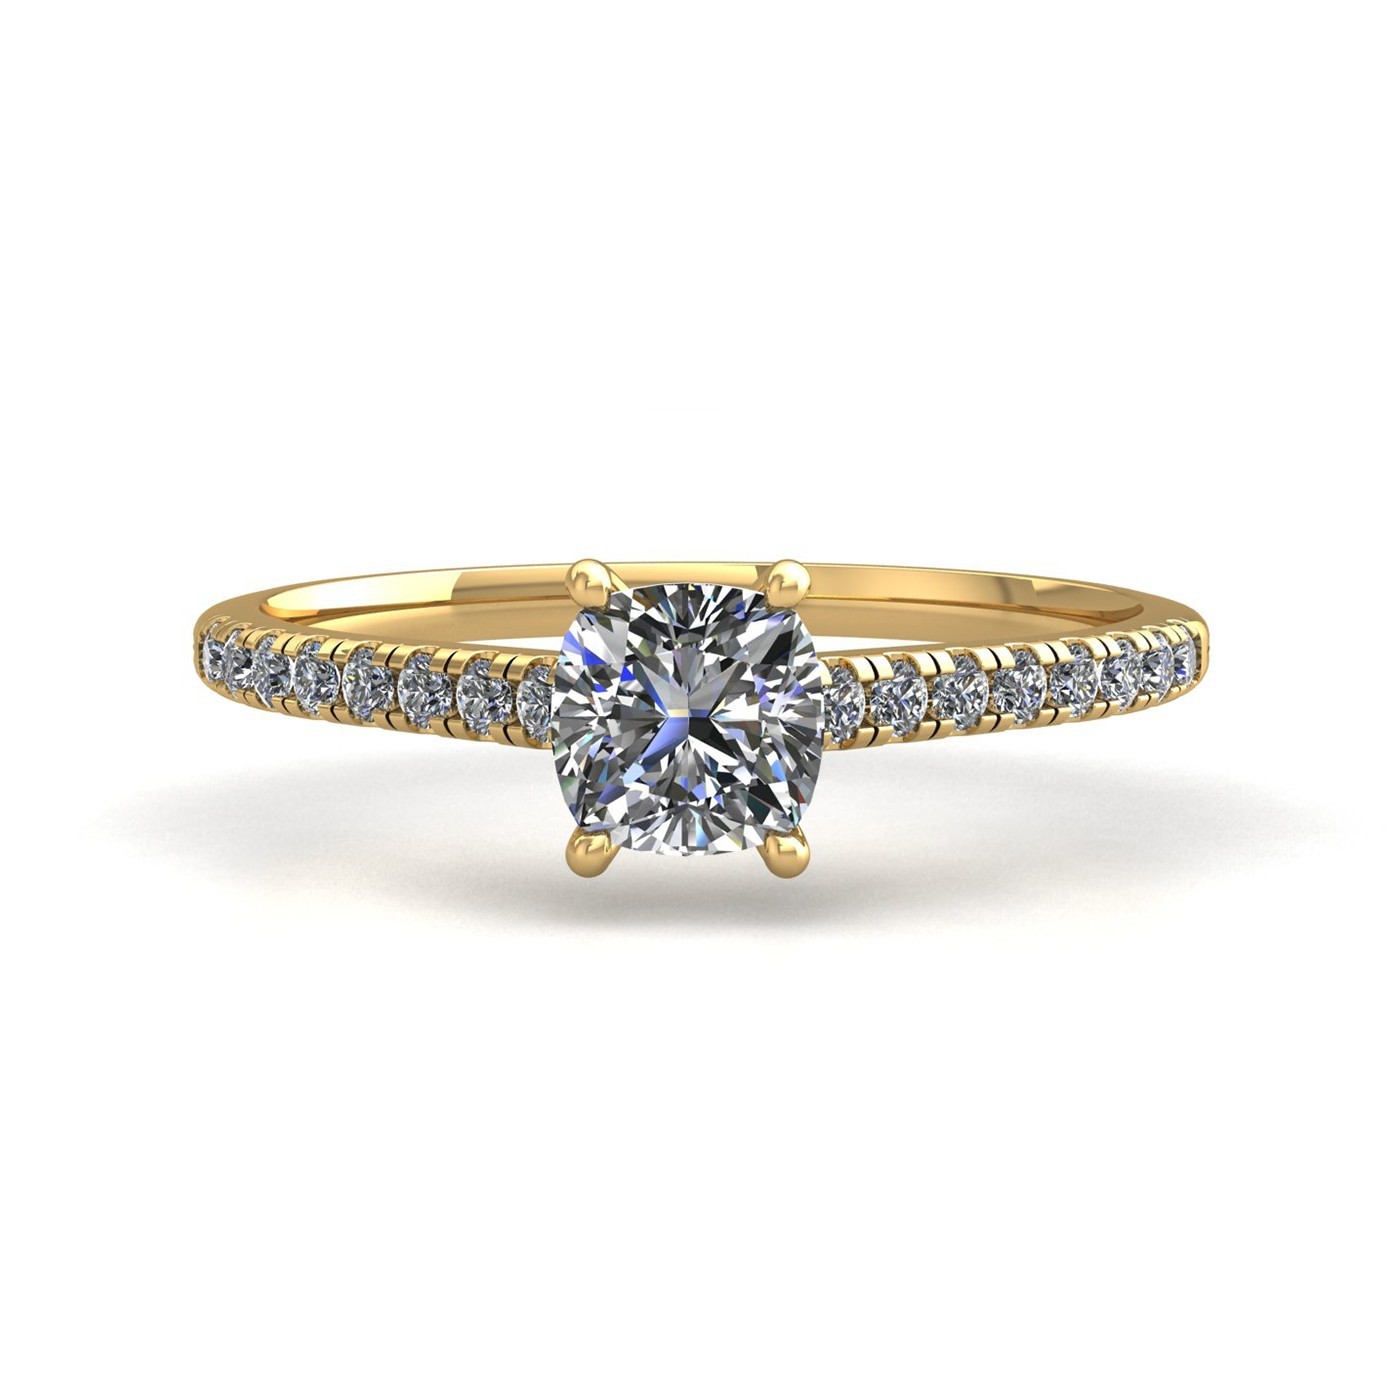 18k yellow gold 2.5ct 4 prongs cushion cut diamond engagement ring with whisper thin pavÉ set band Photos & images